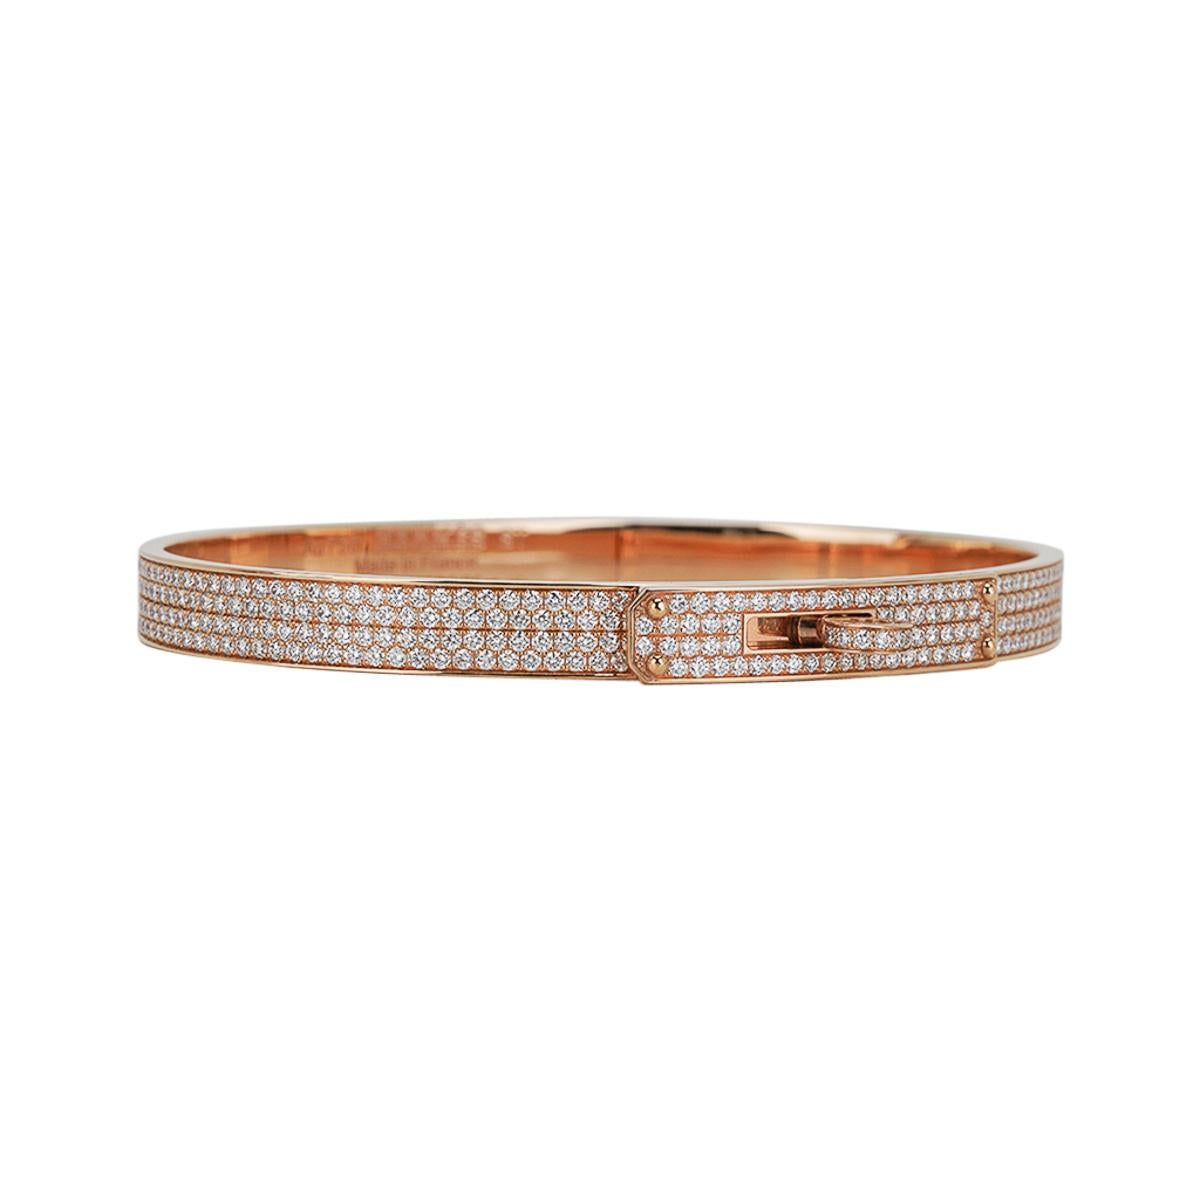 Mightychic offers an Hermes Kelly Bracelet Small Model set with 539 diamonds.
Chic and instantly recognizable this 18k Yellow Gold full set diamond bangle bracelet
is very difficult to procure. 
Total carat weight of the diamonds is 3.25 ct.